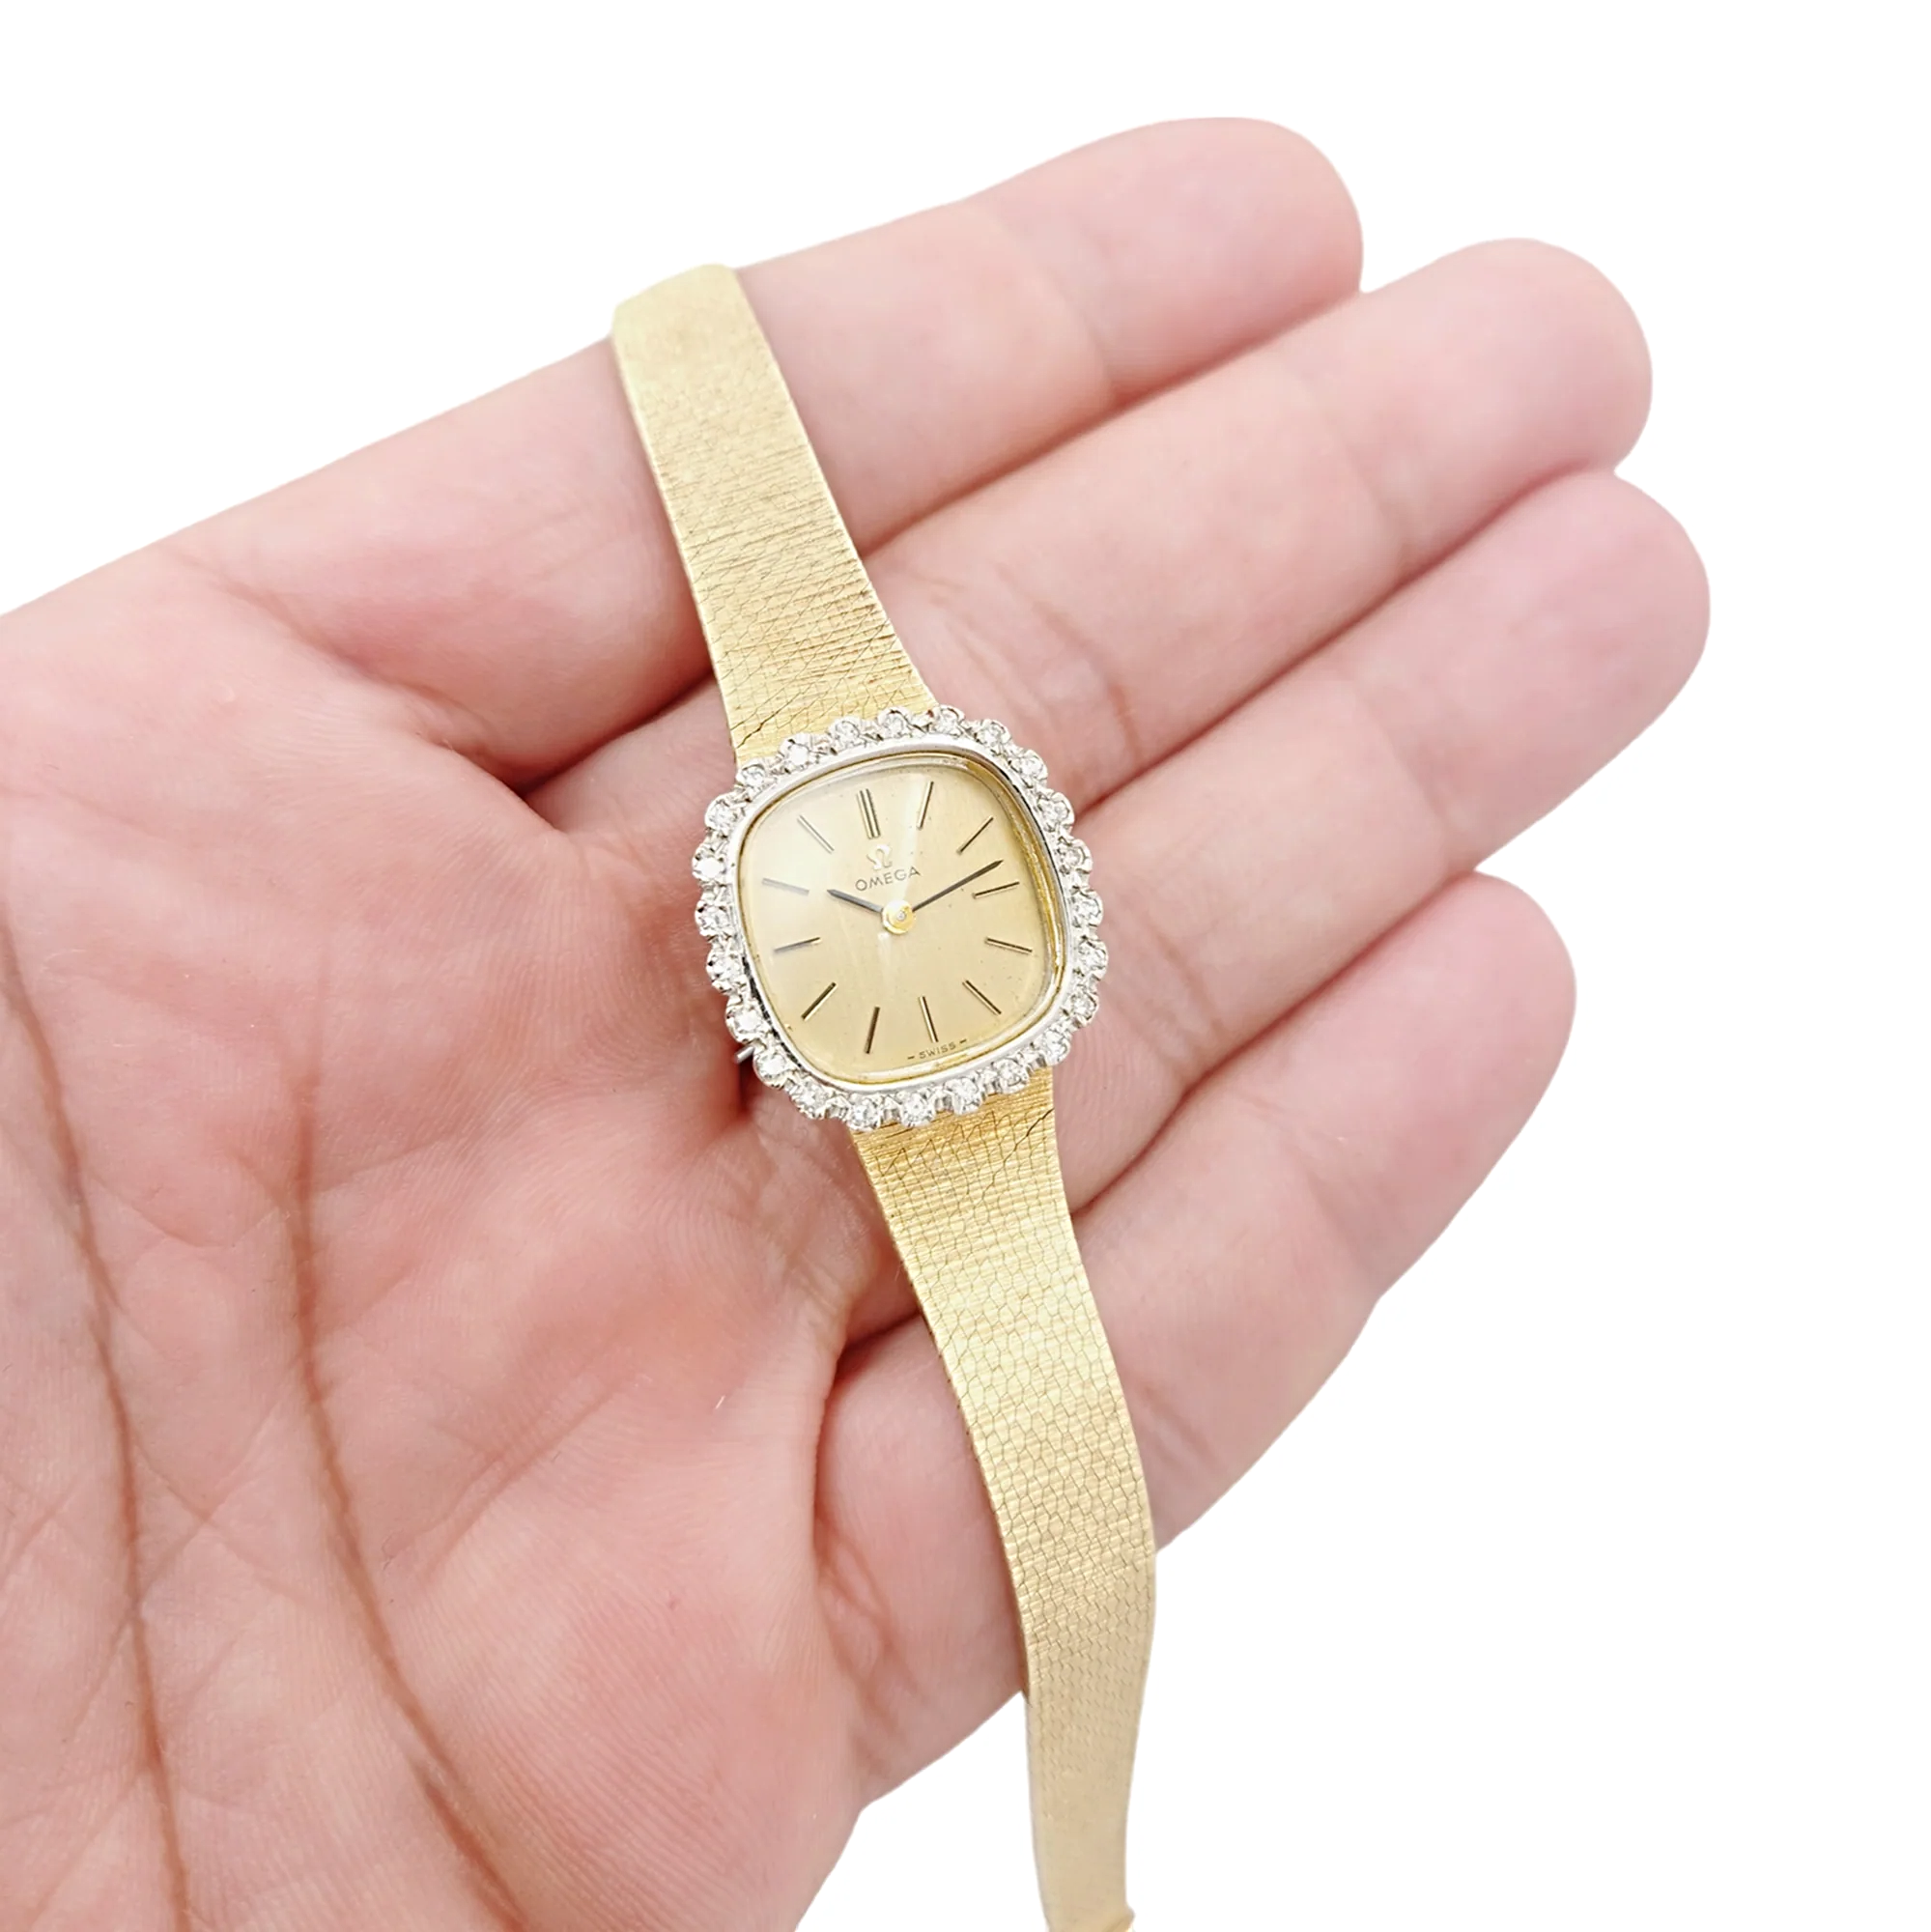 *Ladies Omega 20mm Vintage 14K Yellow Gold Automatic Watch with Gold Dial and Diamond Bezel. (Pre-Owned)